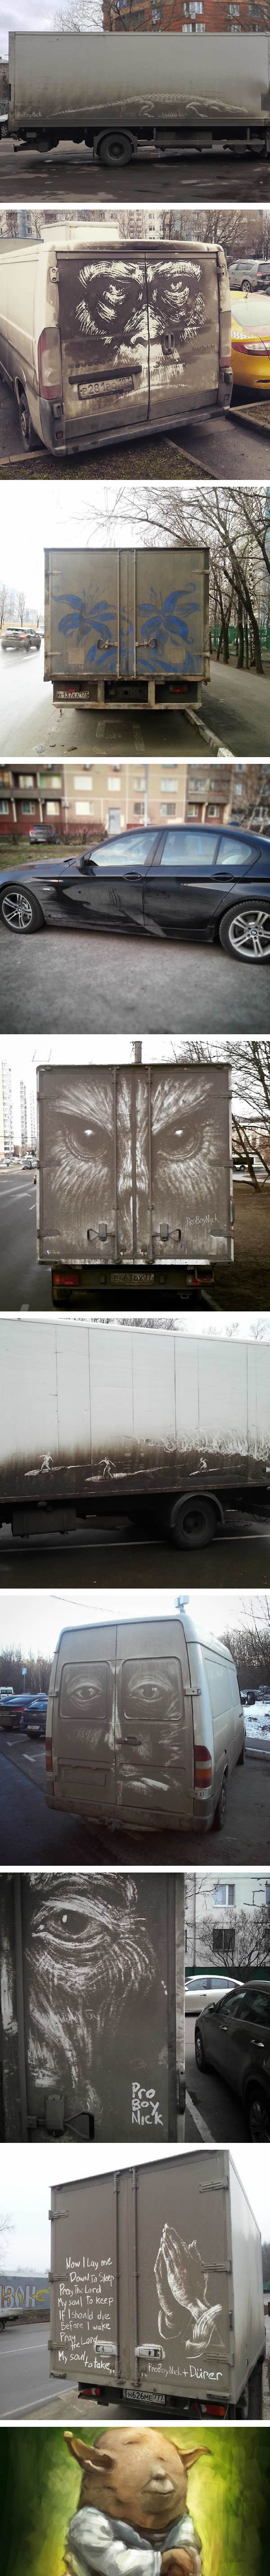 dirty car owners find their cars vandalized with amazing drawings, street art